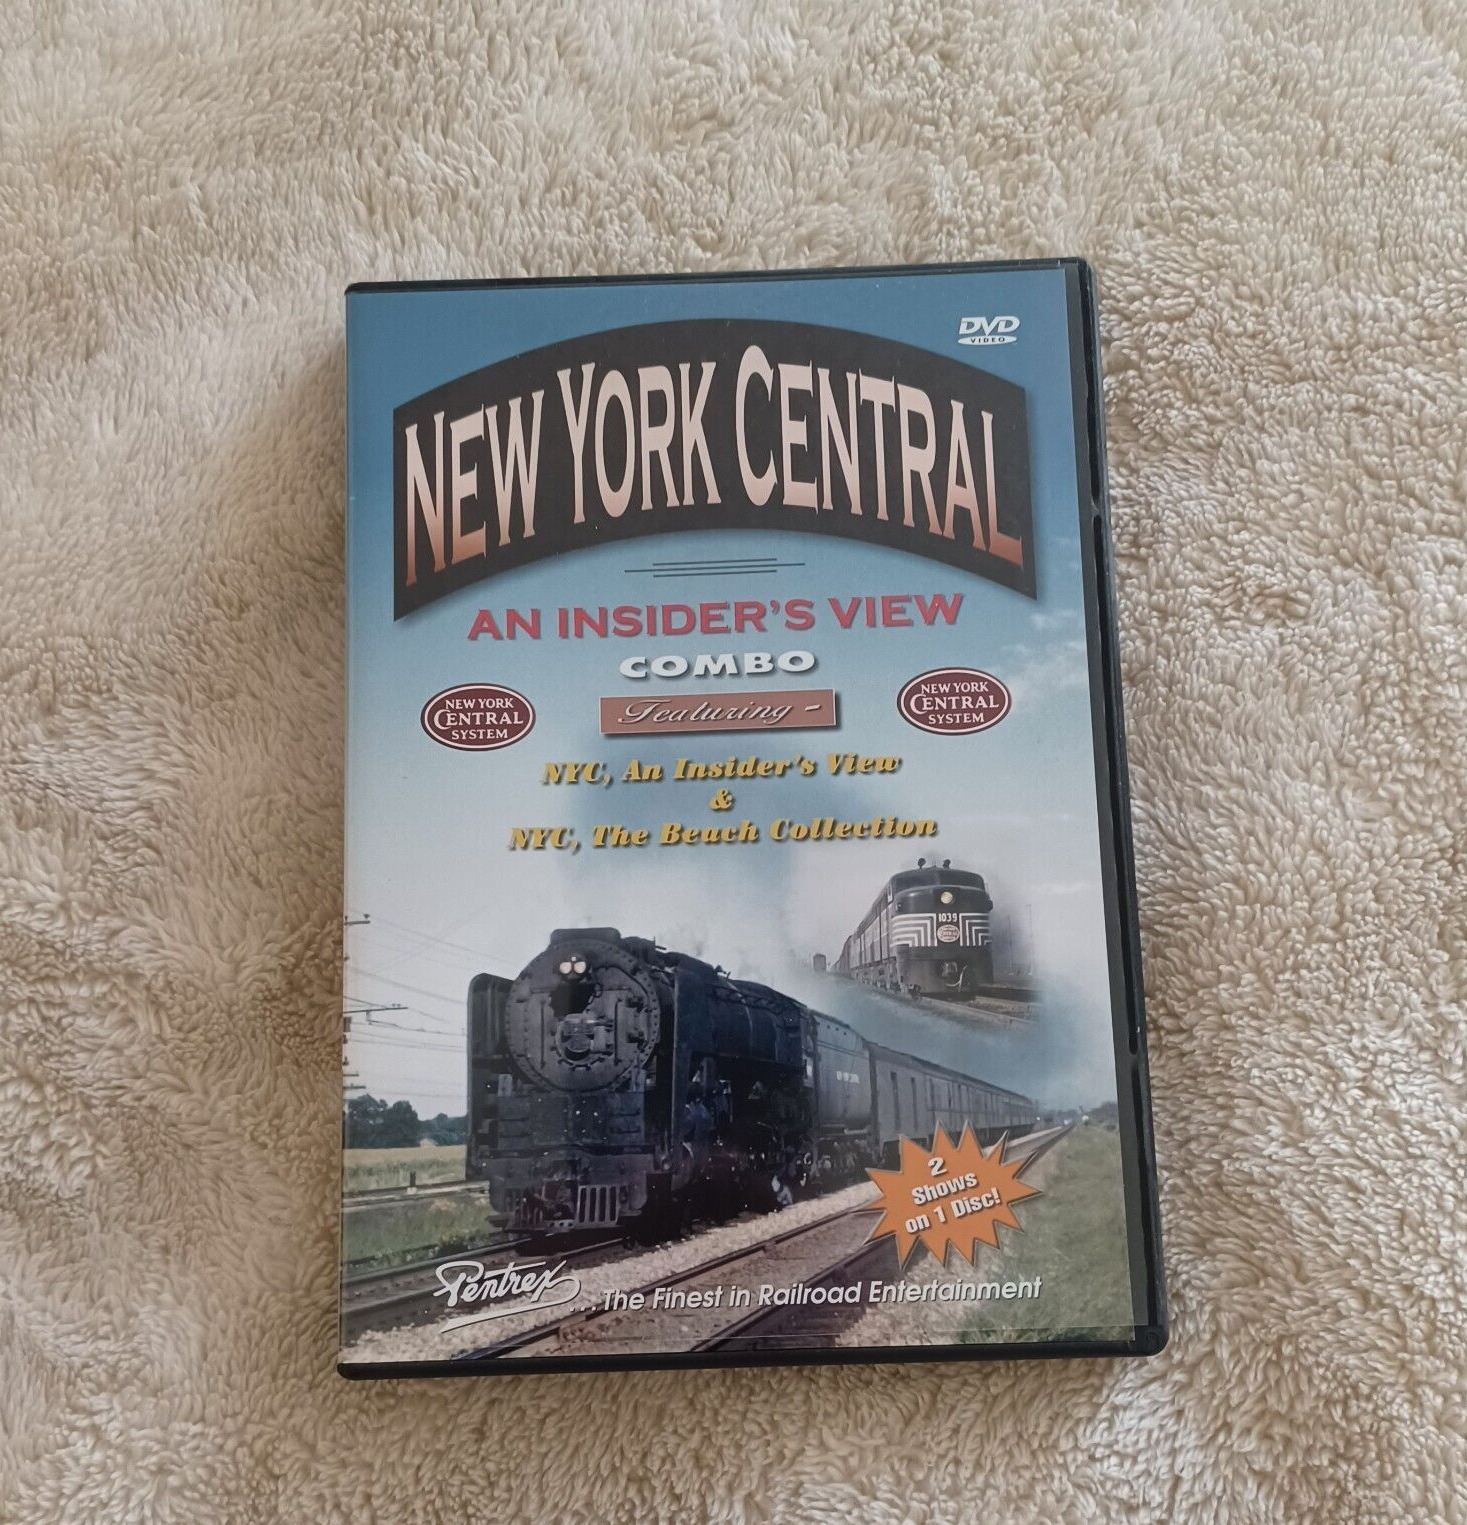 New York Central - An Insiders View Combo DVD by Pentrex